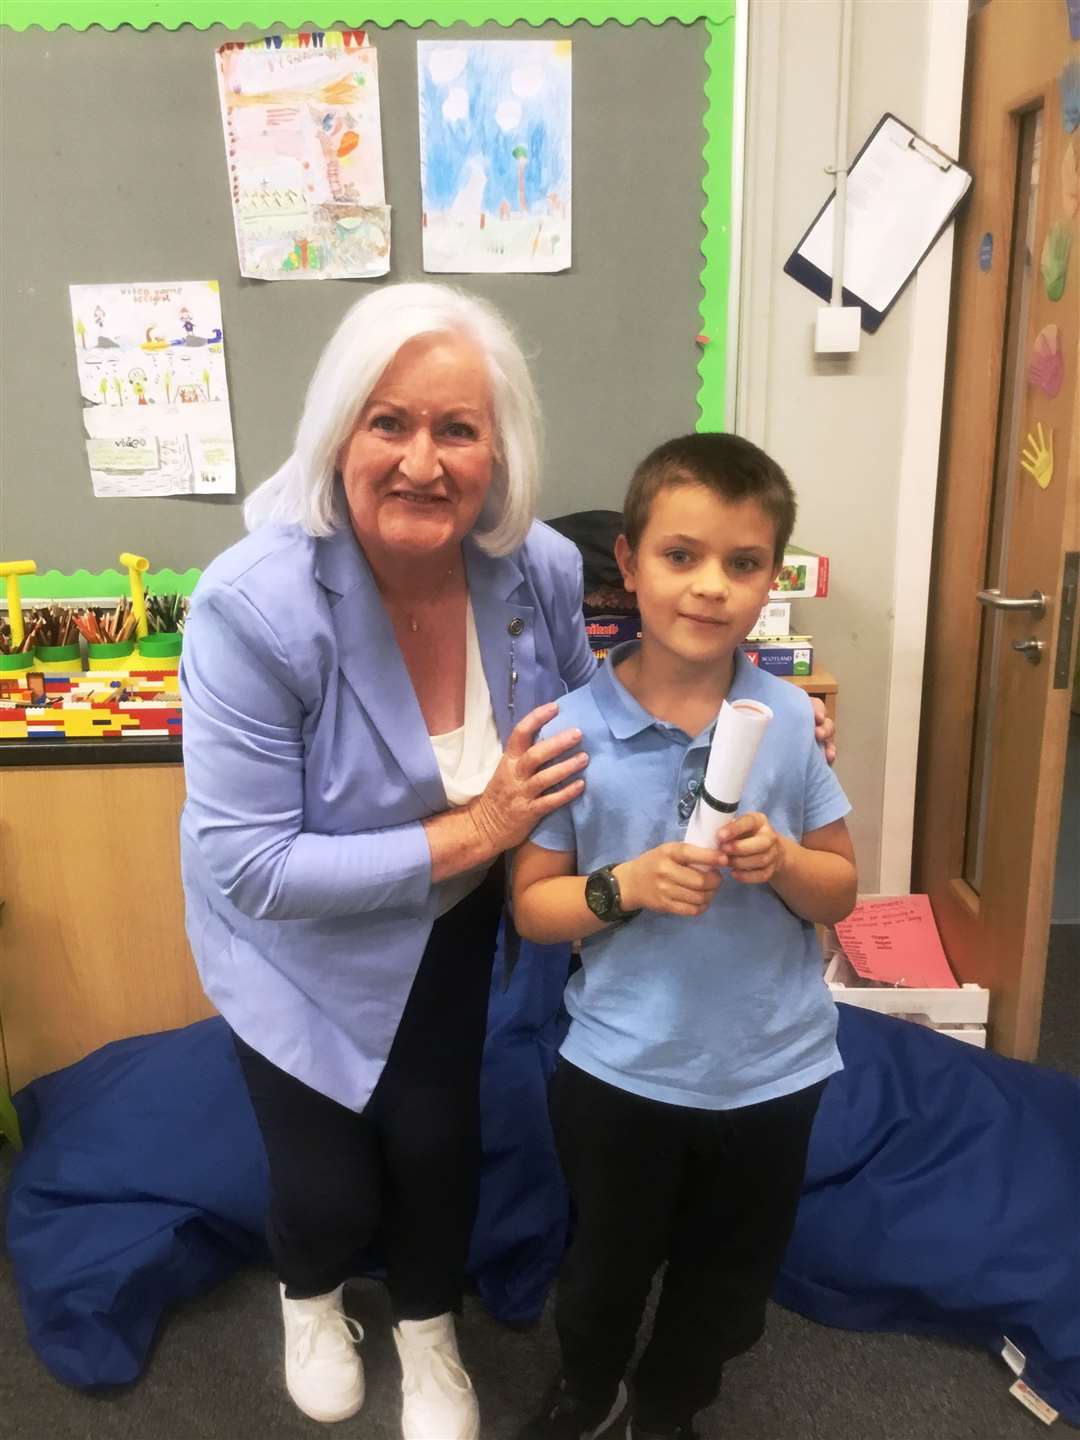 Young Lewis Mackay, who won the p1-3 class at Farr Primary School was presented with his certificate by Deputy Lieutenant Frances Gunn.